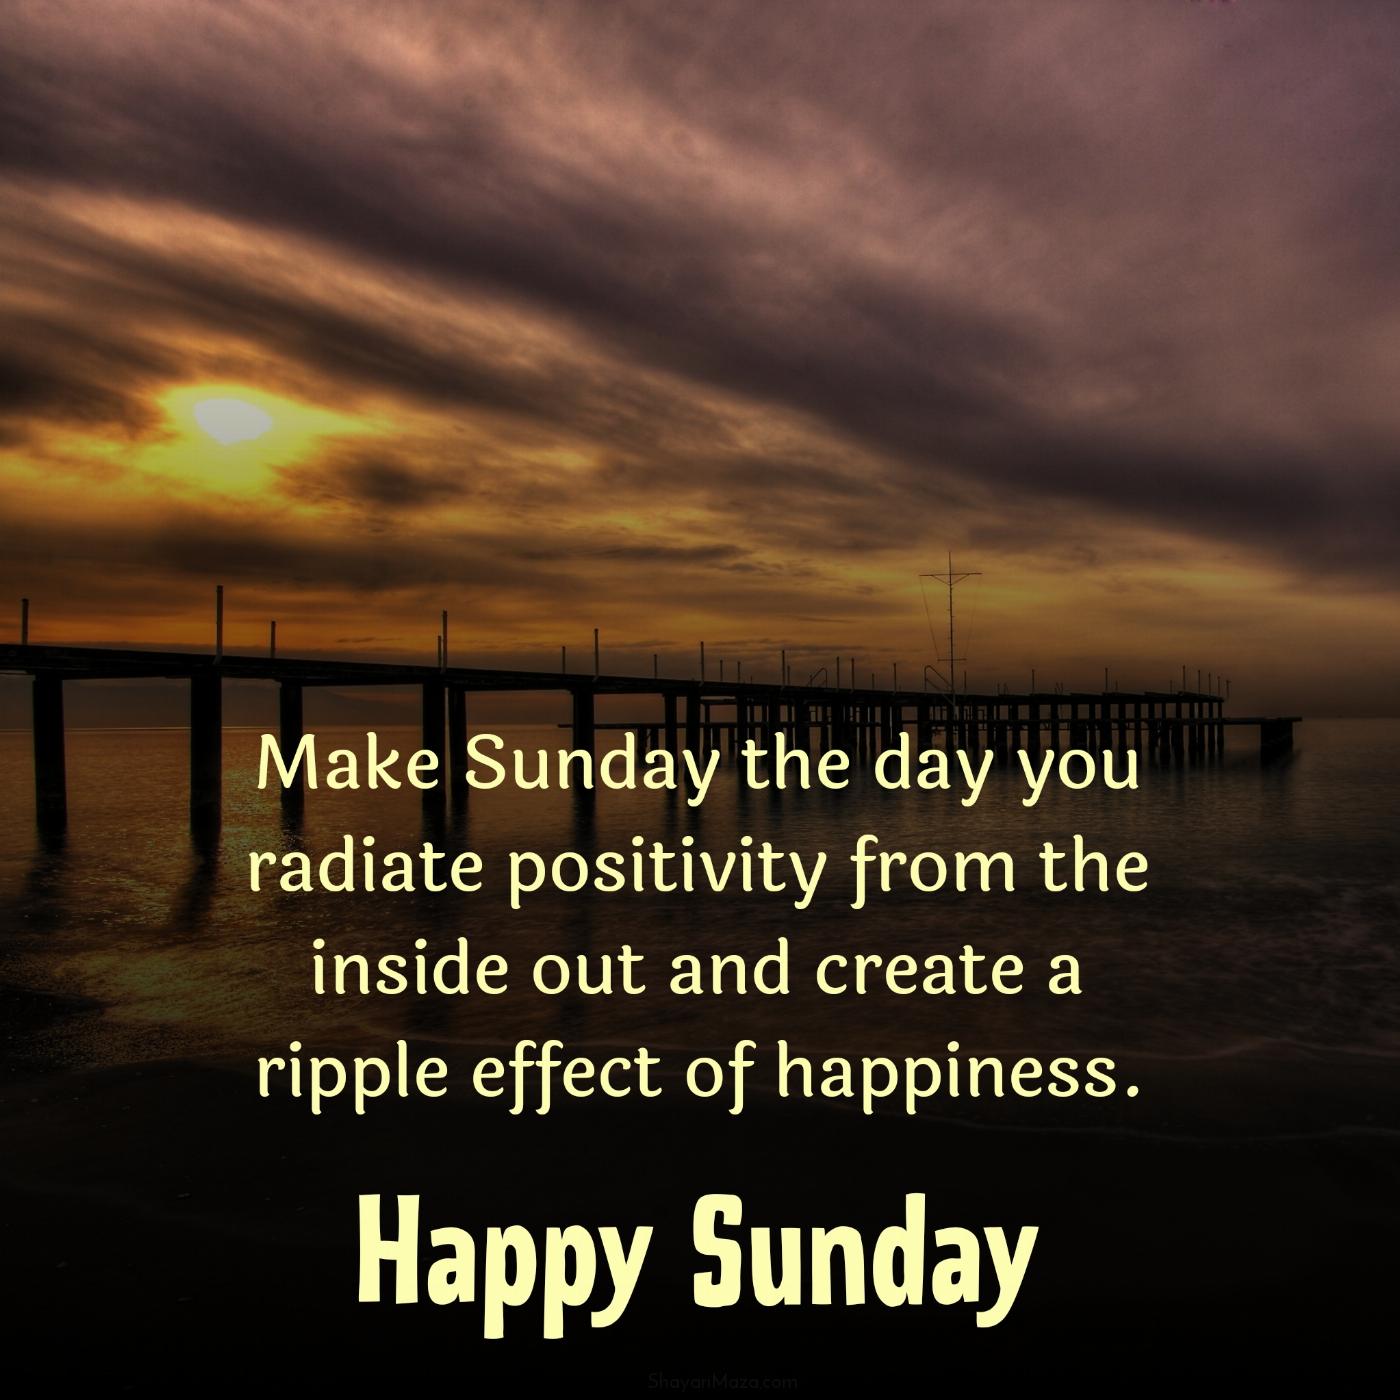 Make Sunday the day you radiate positivity from the inside out